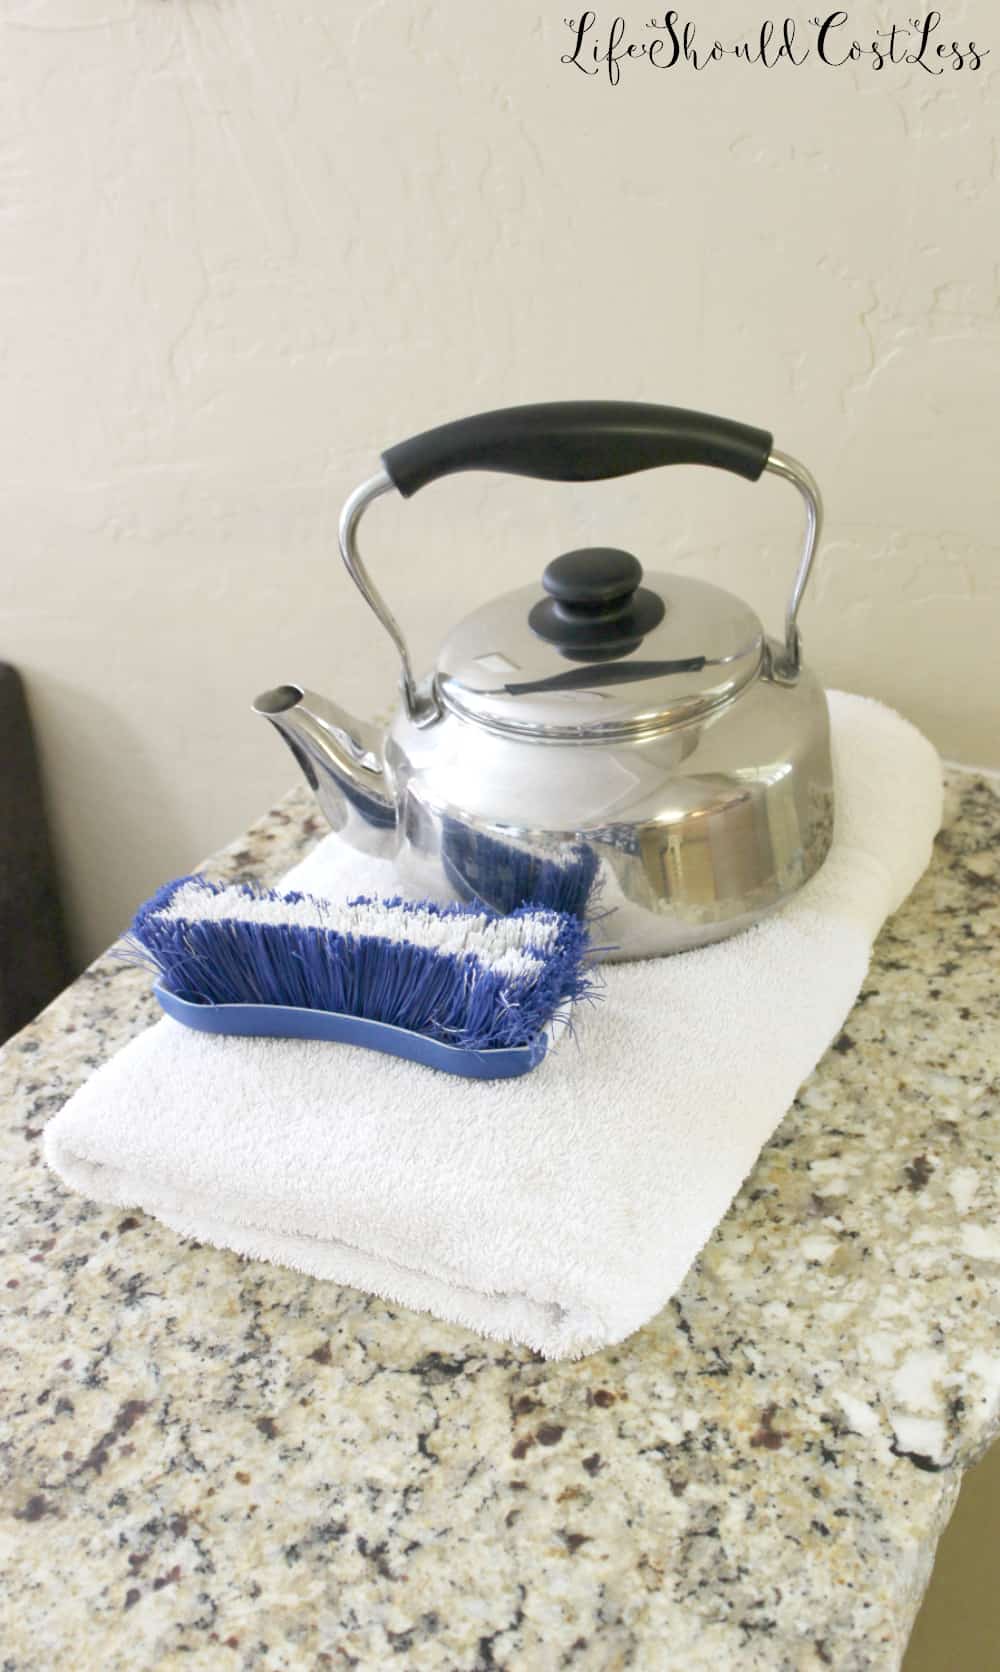 How To Clean Grout With Water {The Easiest Way To Clean Grout EVER